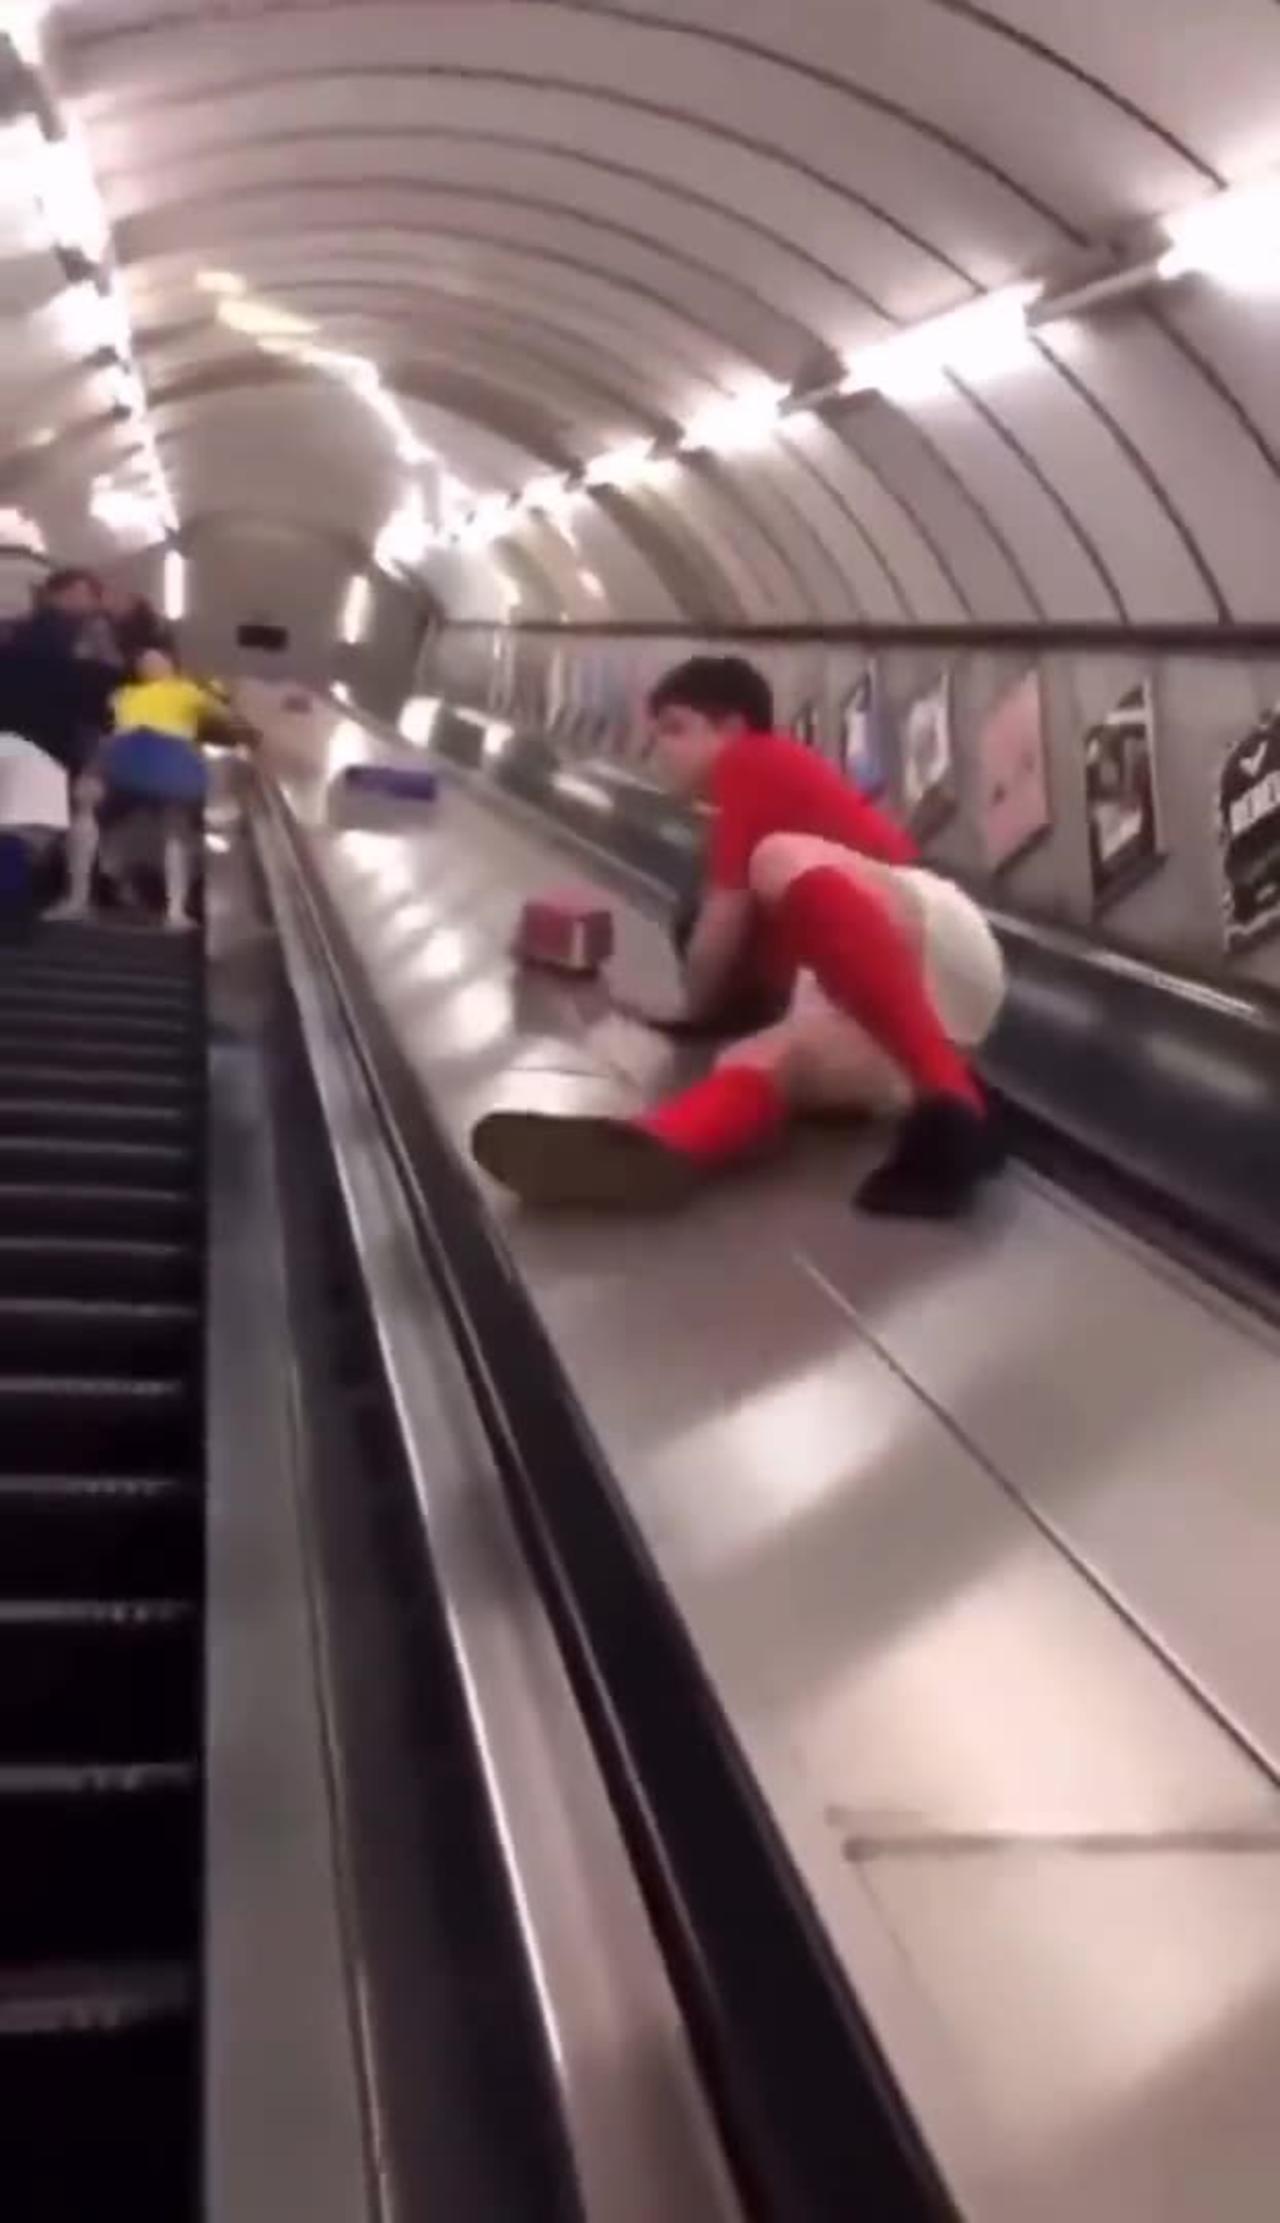 Boy fell from stair😂😂 #funny #funnyvideo